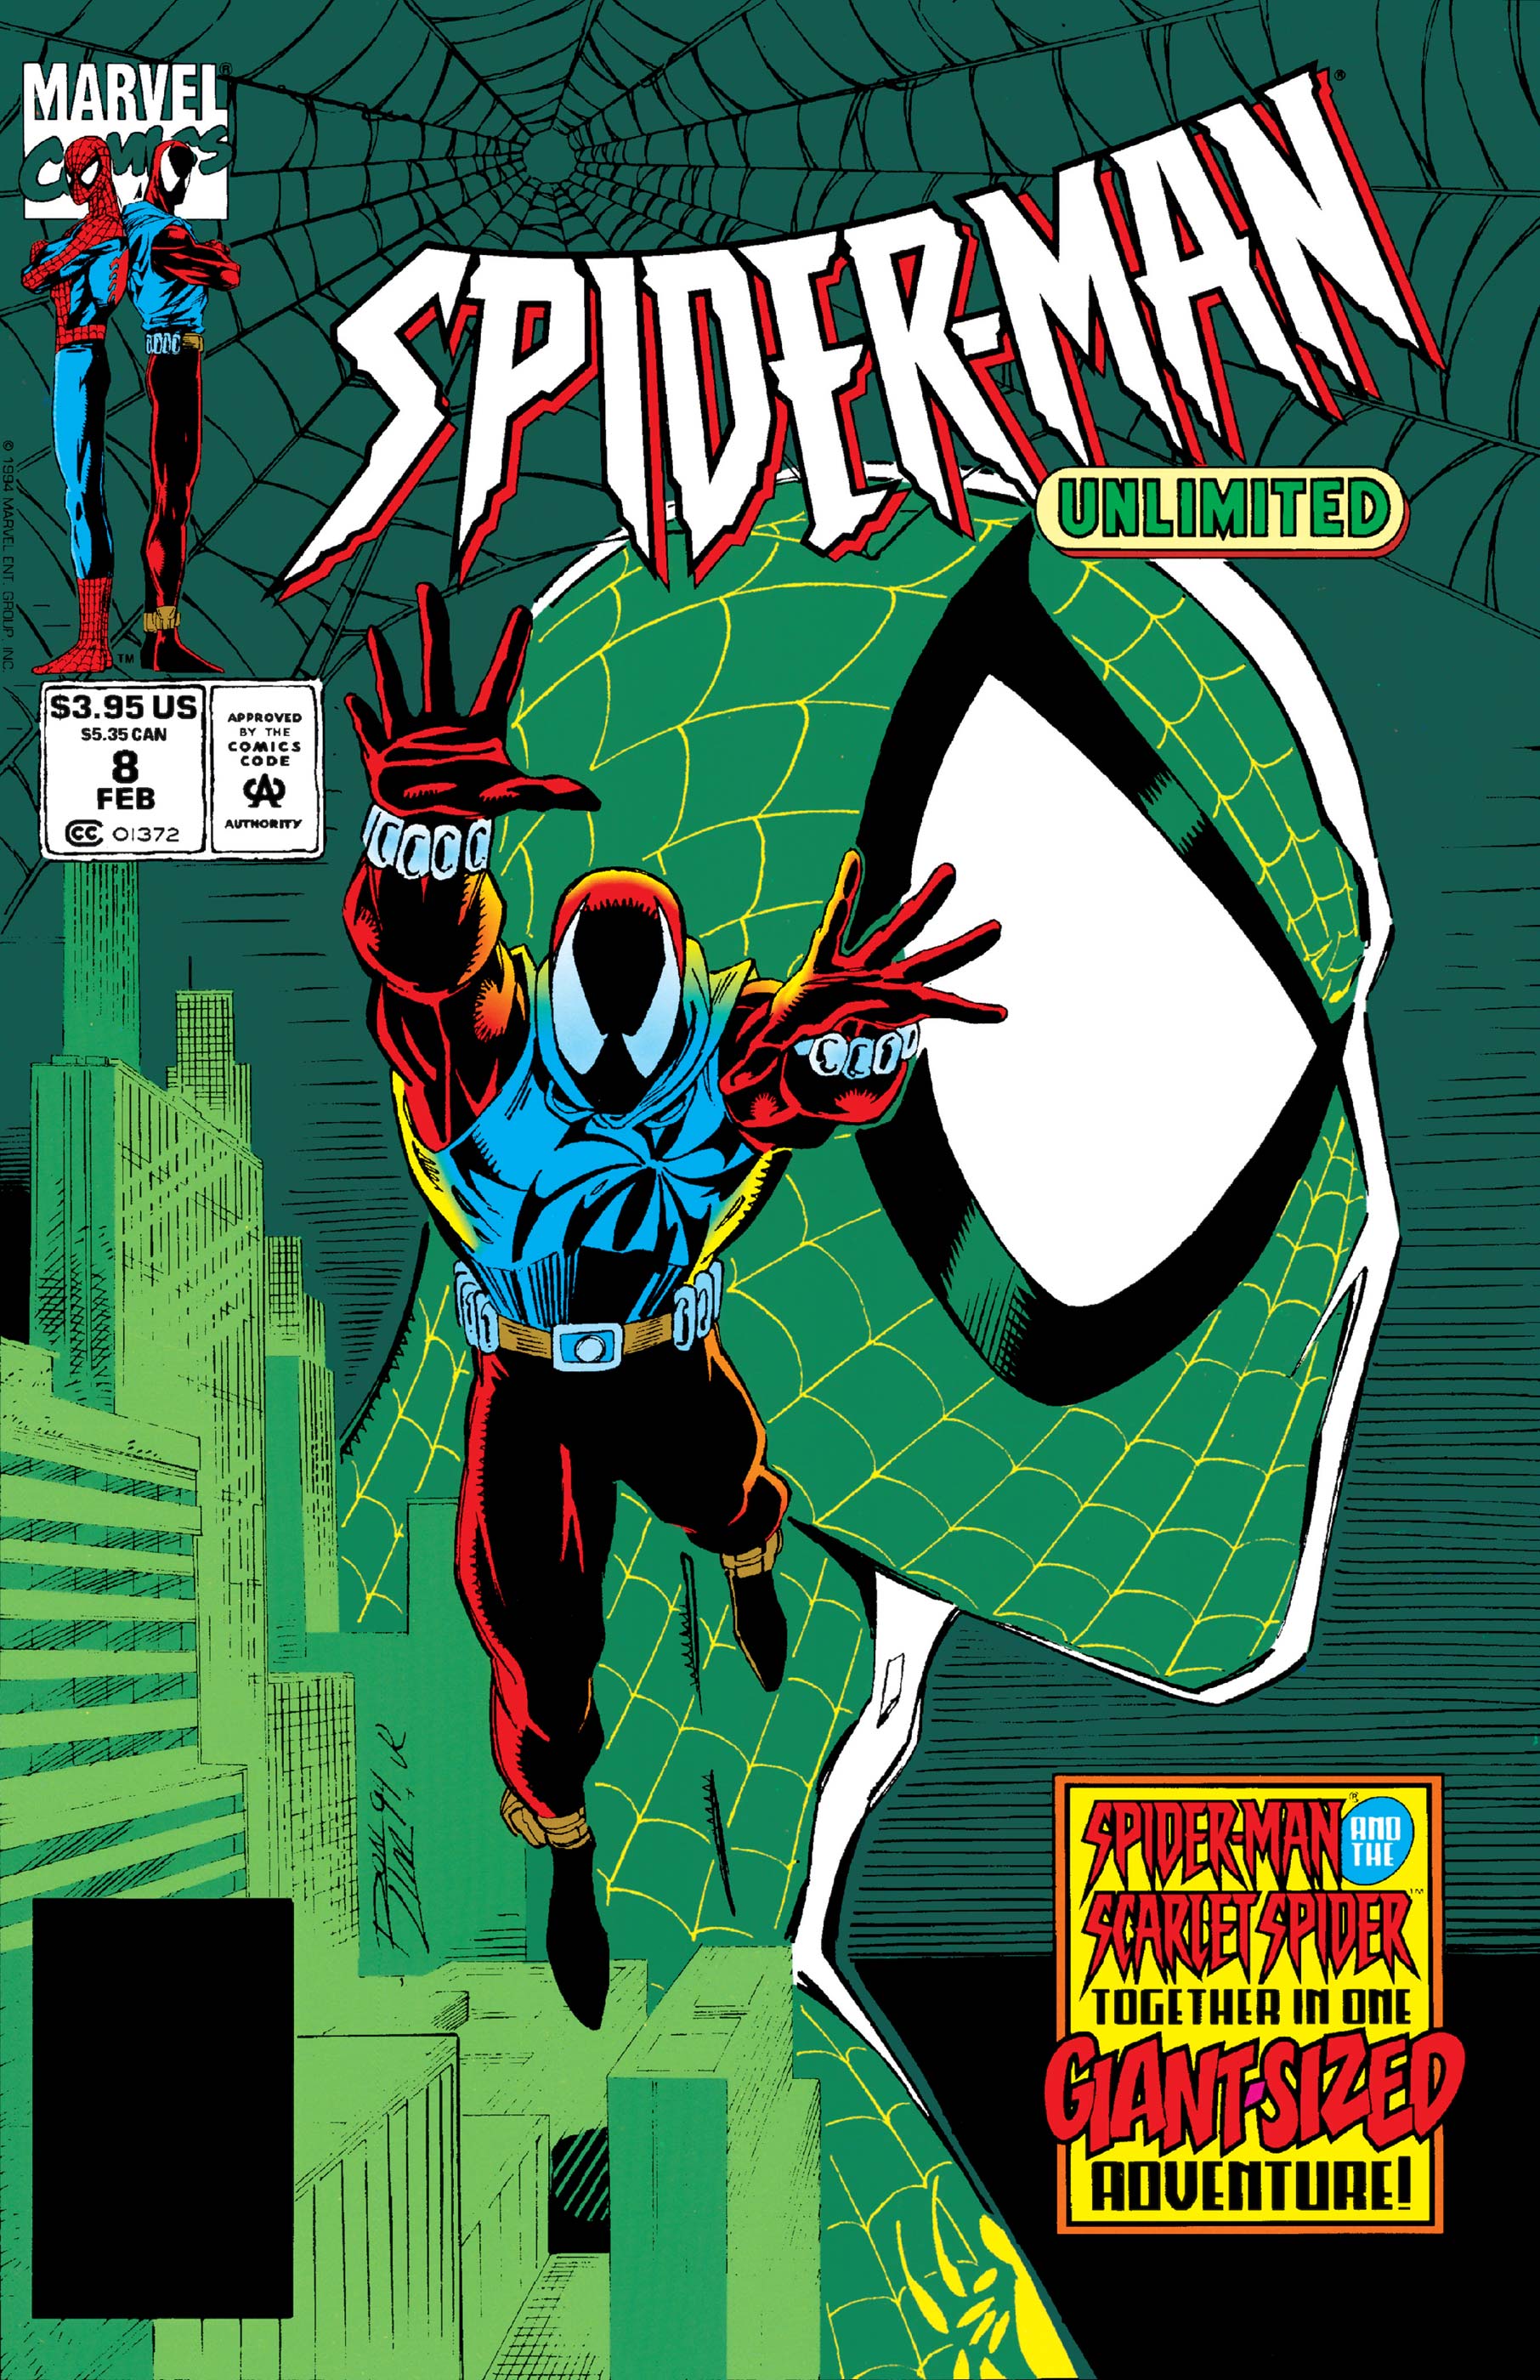 Spider-Man Unlimited (1993) #8 | Comic Issues | Marvel